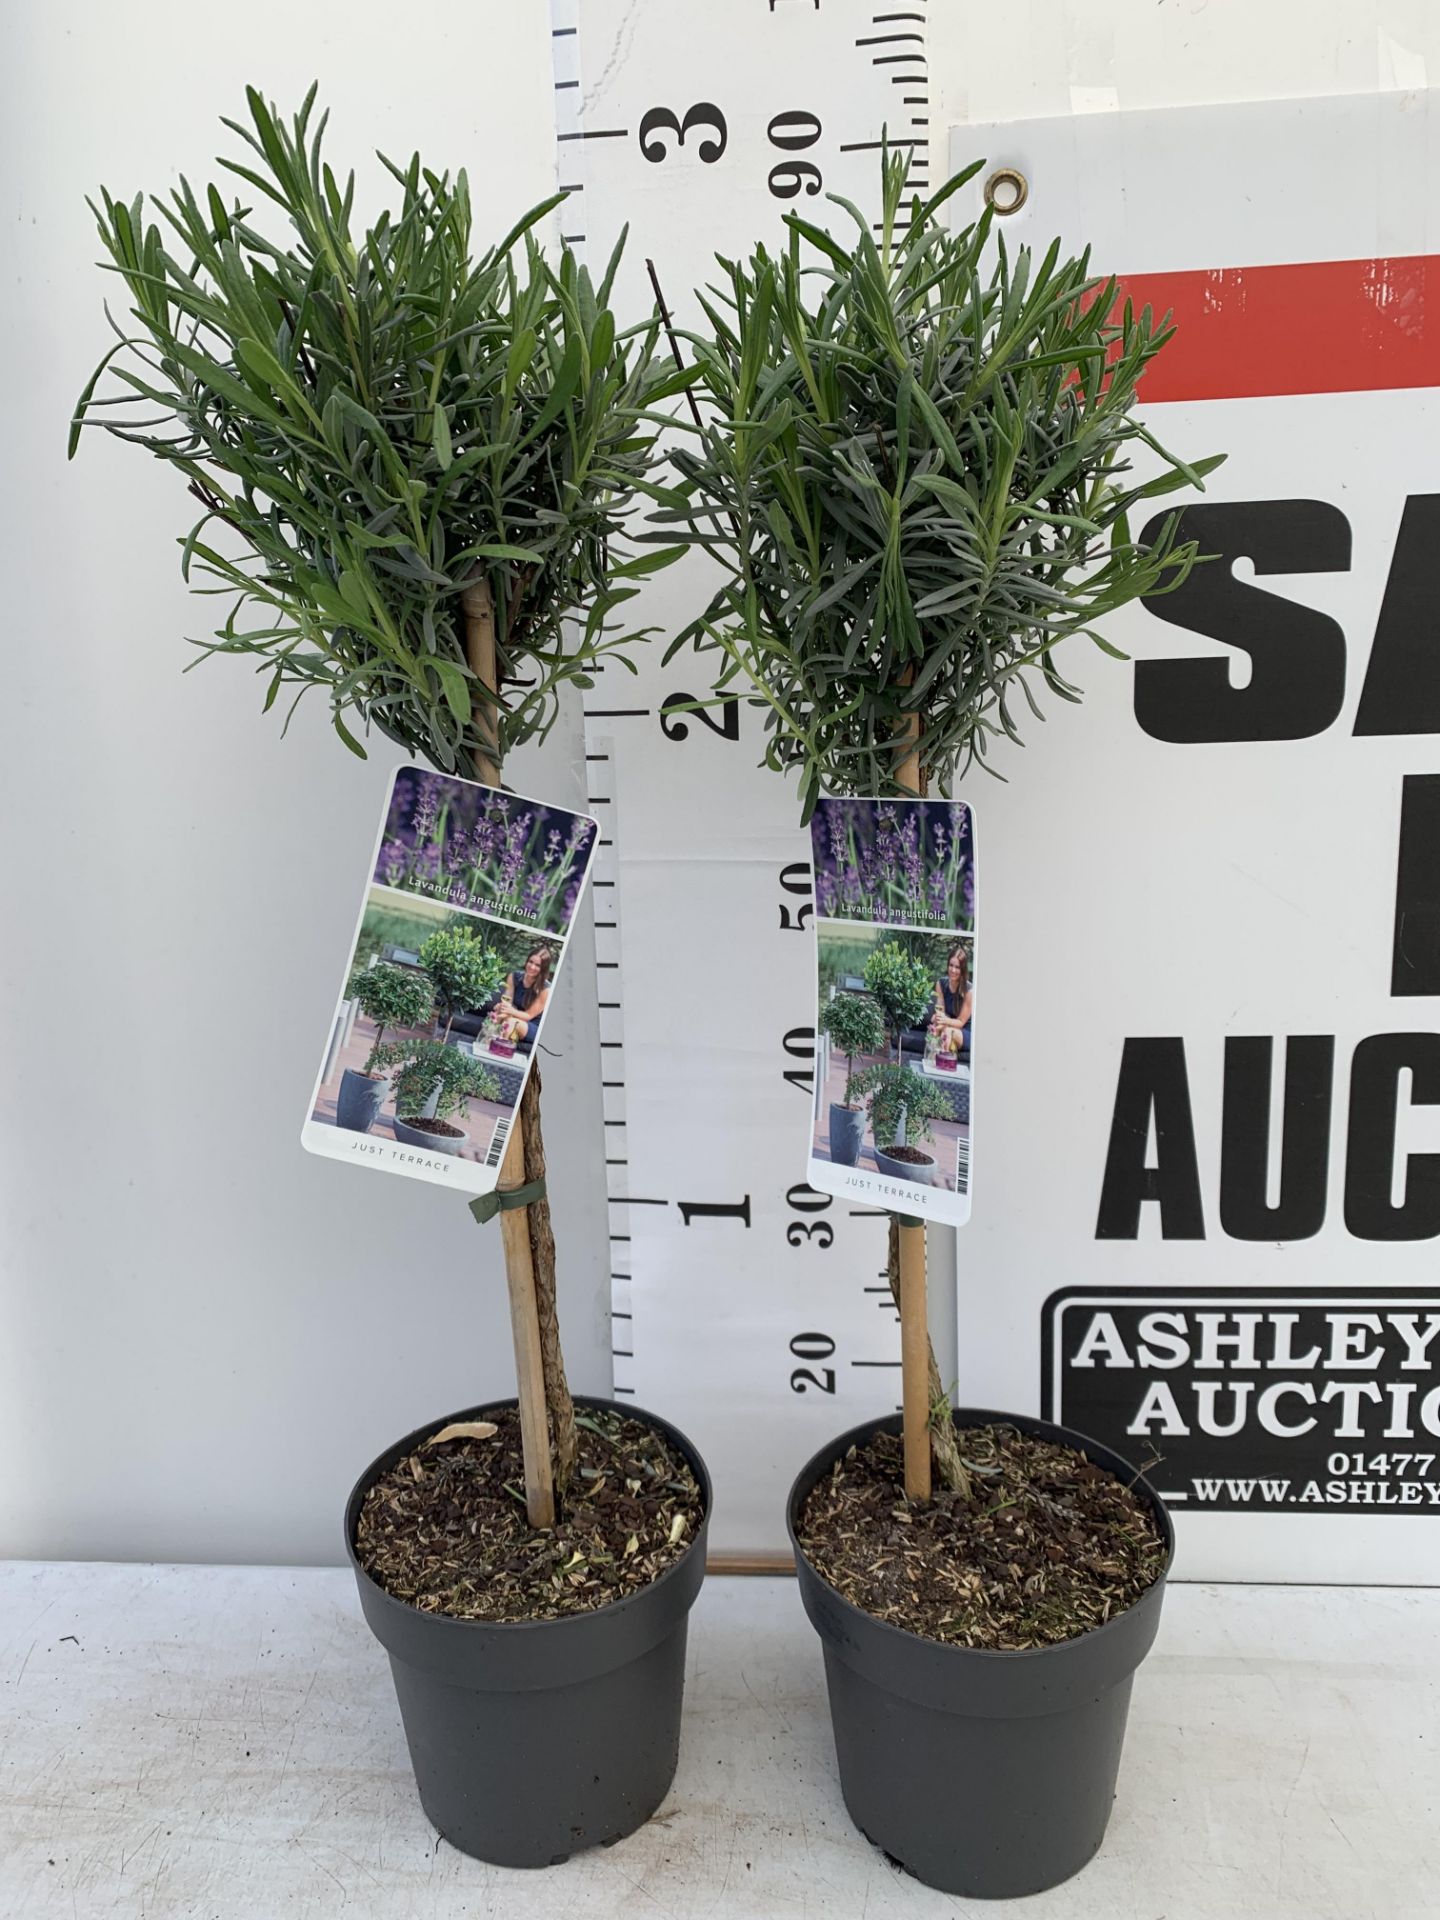 TWO STANDARD LAVANDER PLANTS IN 3 LTR POTS 80CM TALL PLUS VAT TO BE SOLD FOR THE TWO